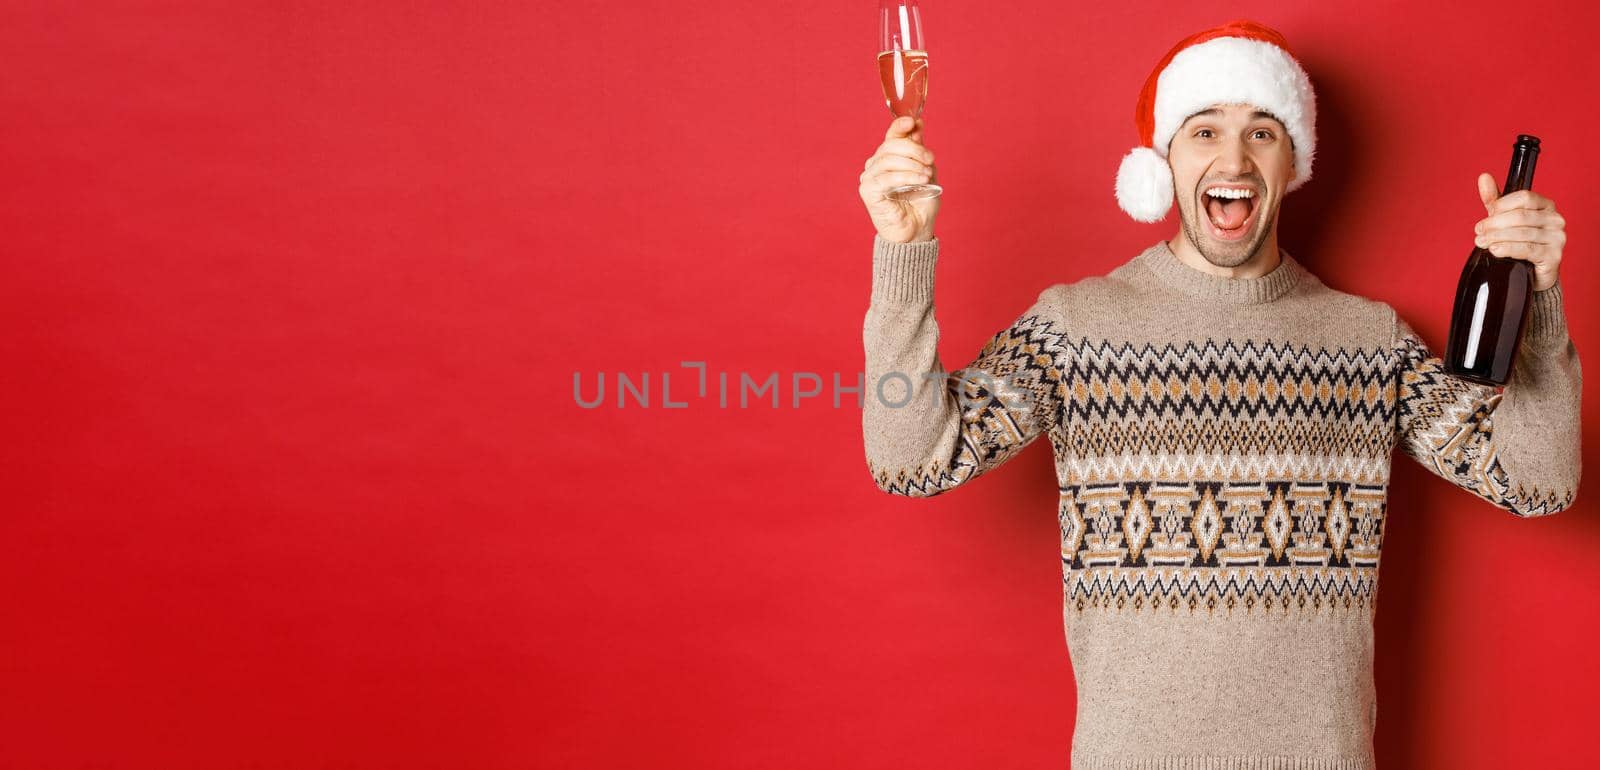 Concept of winter holidays, christmas and celebration. Excited handsome guy in sweater and santa hat, enjoying new year party, raising glass and champagne bottle, having fun.